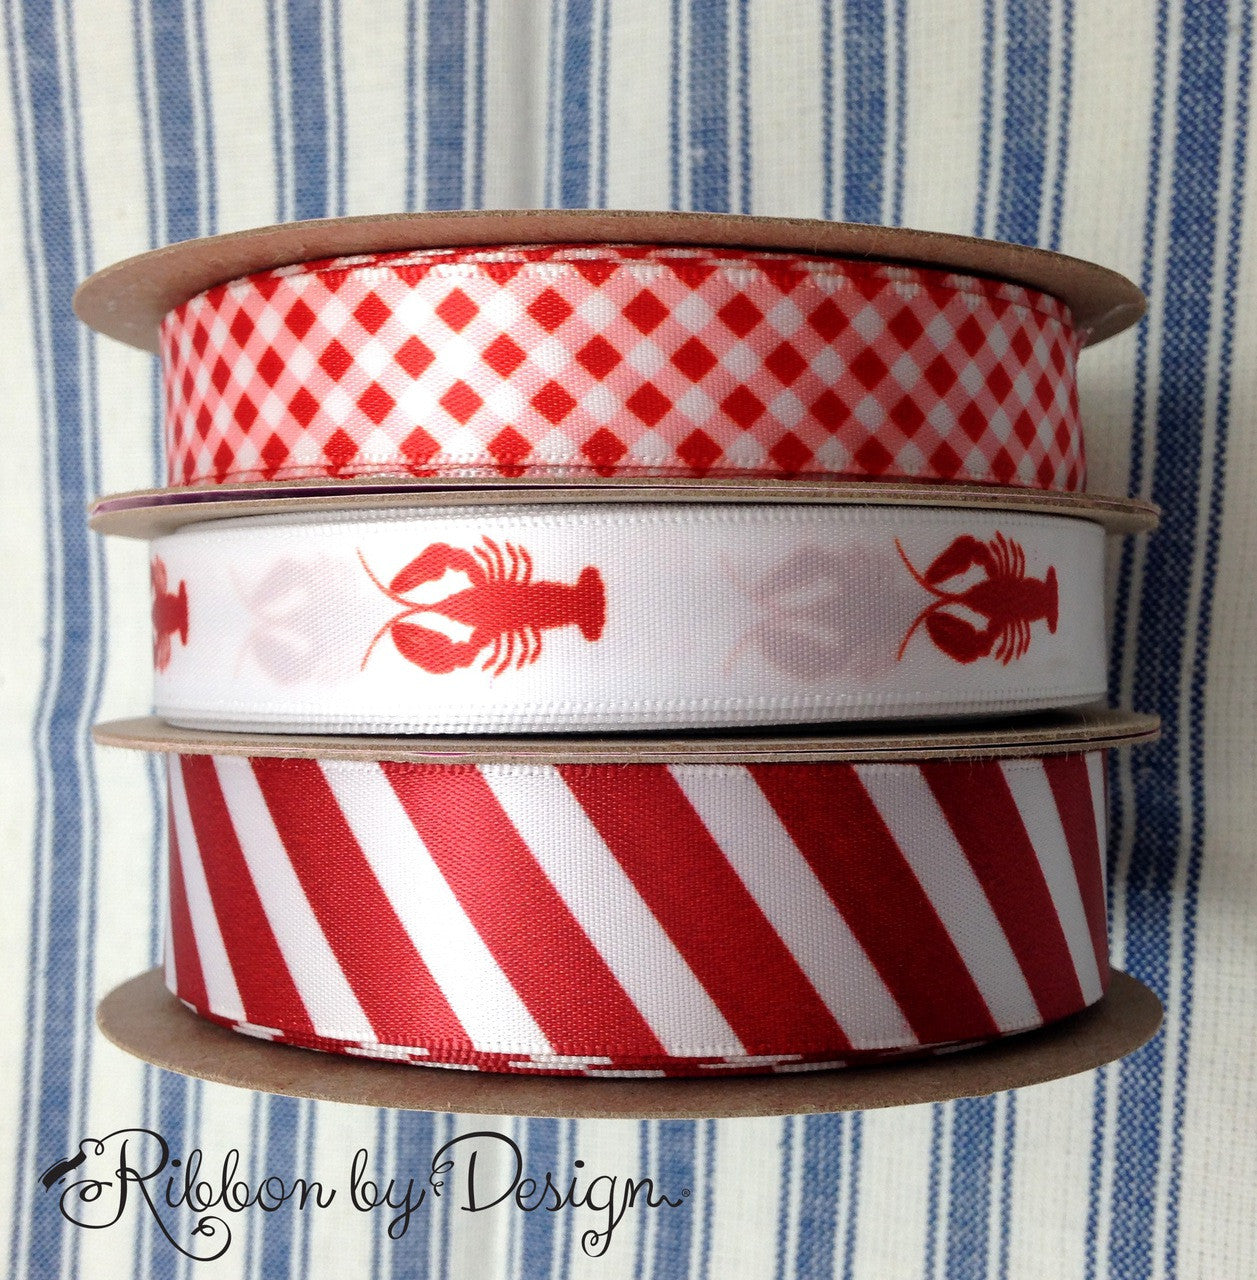 Combine our lobsters with stripes and gingham for a perfect Summer picnic look! Designed and printed in the USA